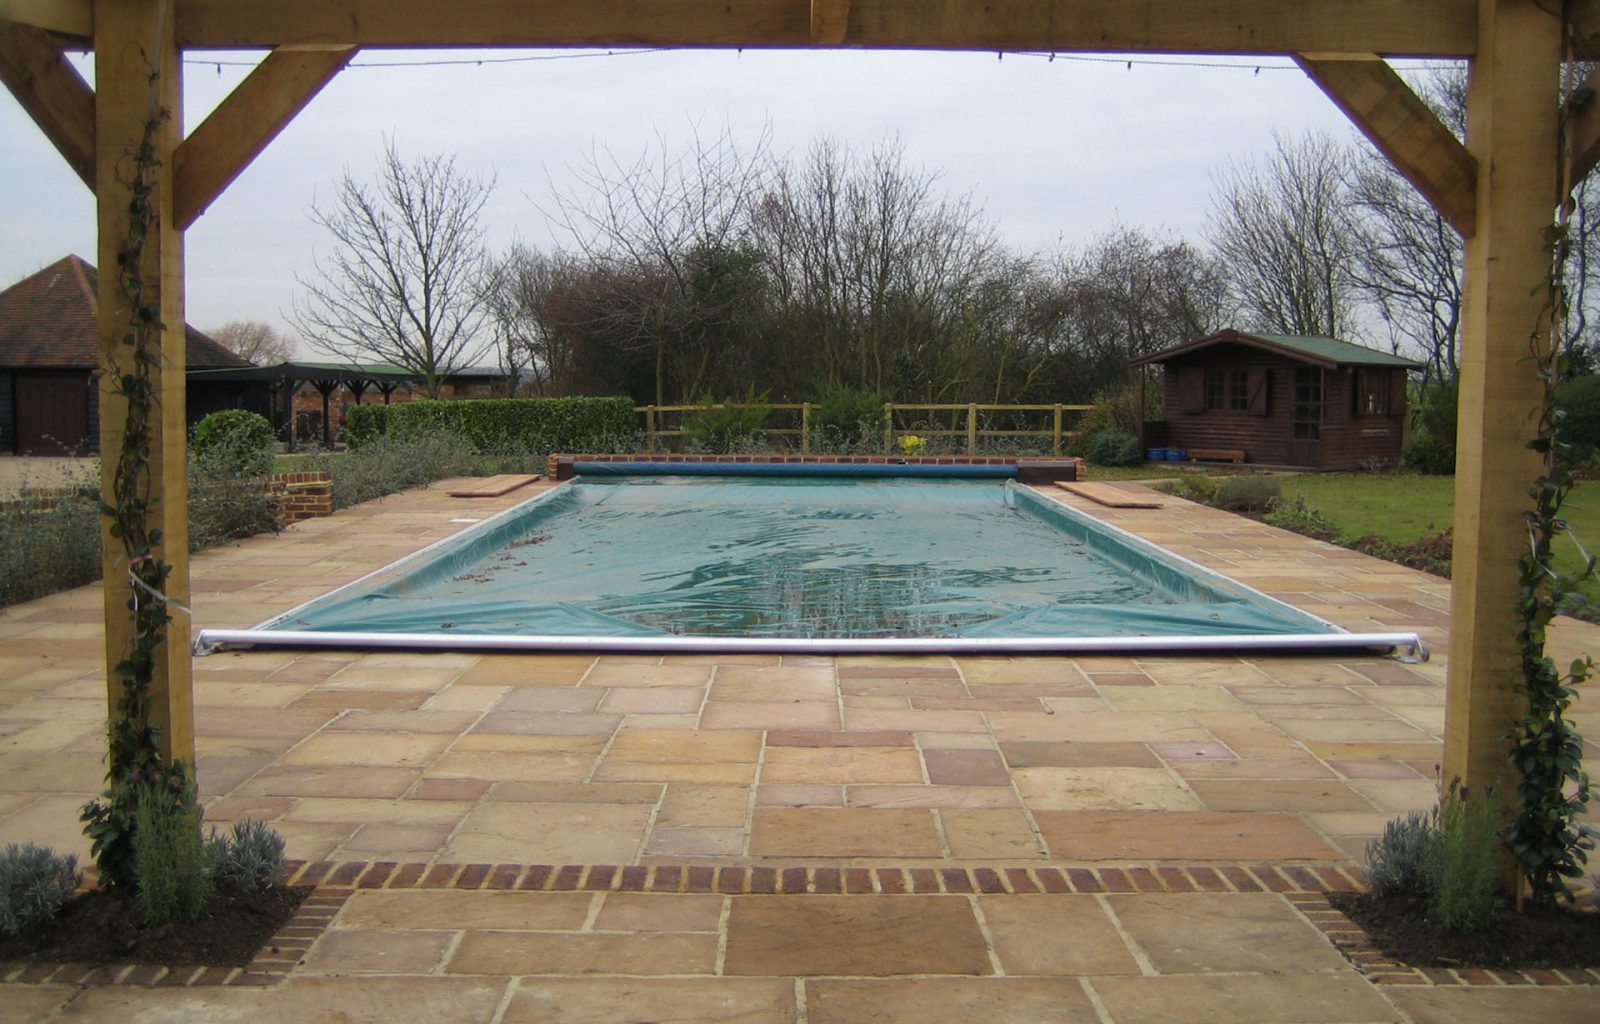 Outdoor swimming pool with surrounding paving, a timber summer house in the background and a wooden pergola in the foreground